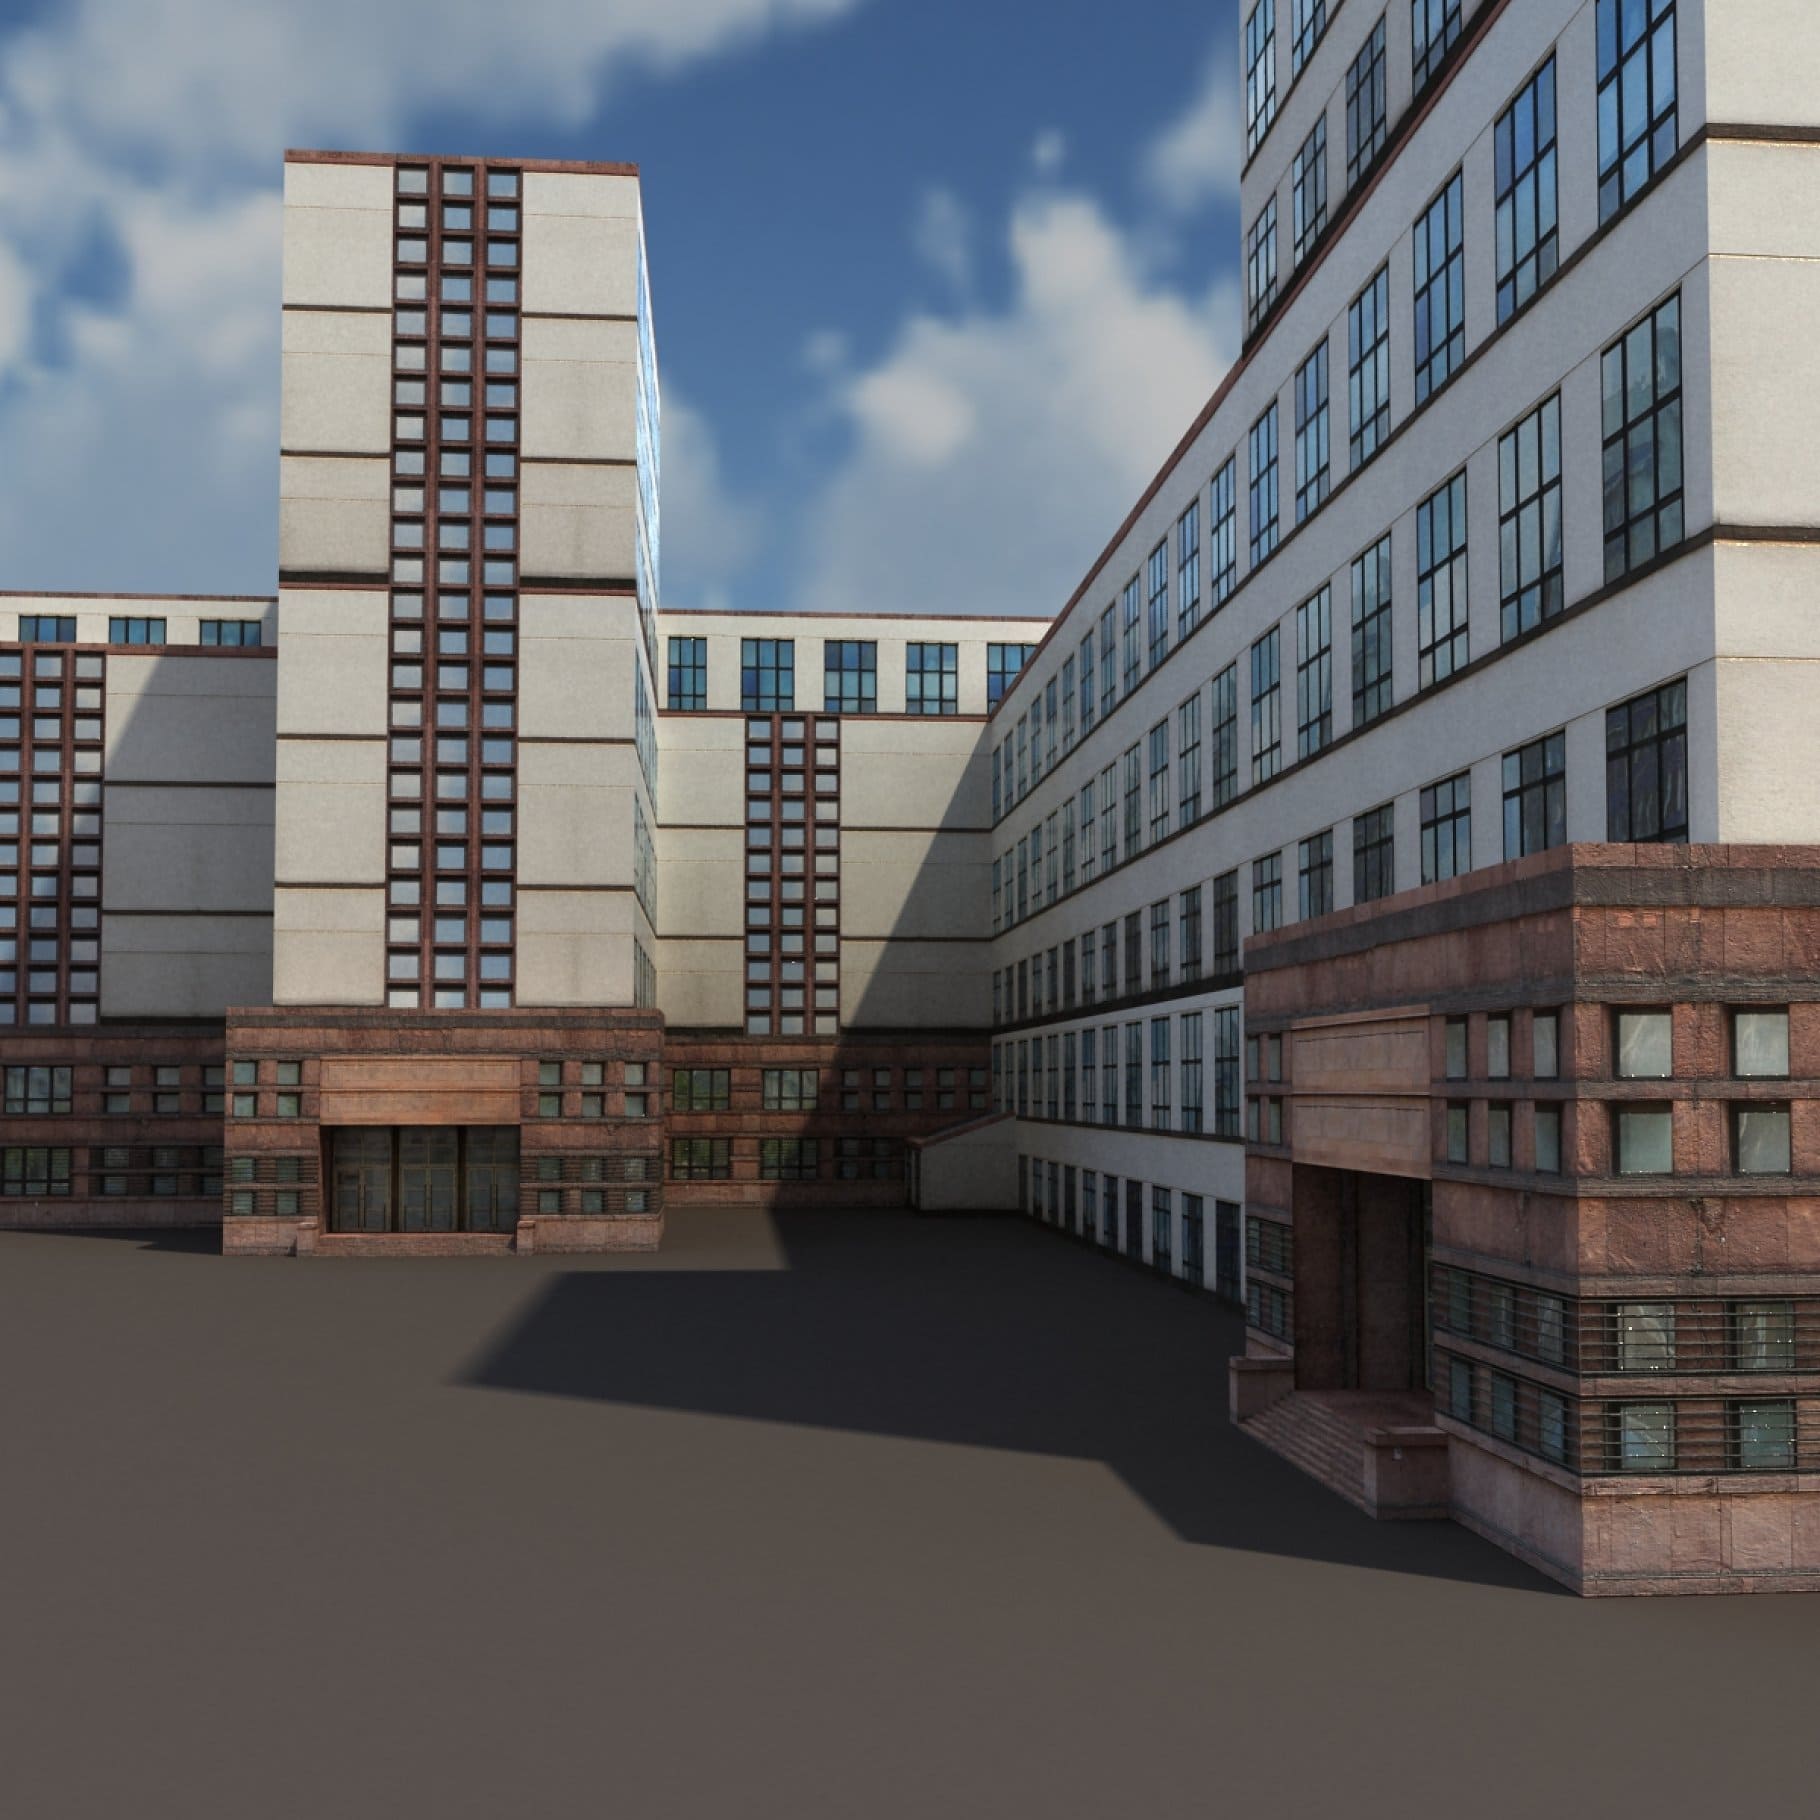 3D model of an office building where concrete slabs and glass are combined.